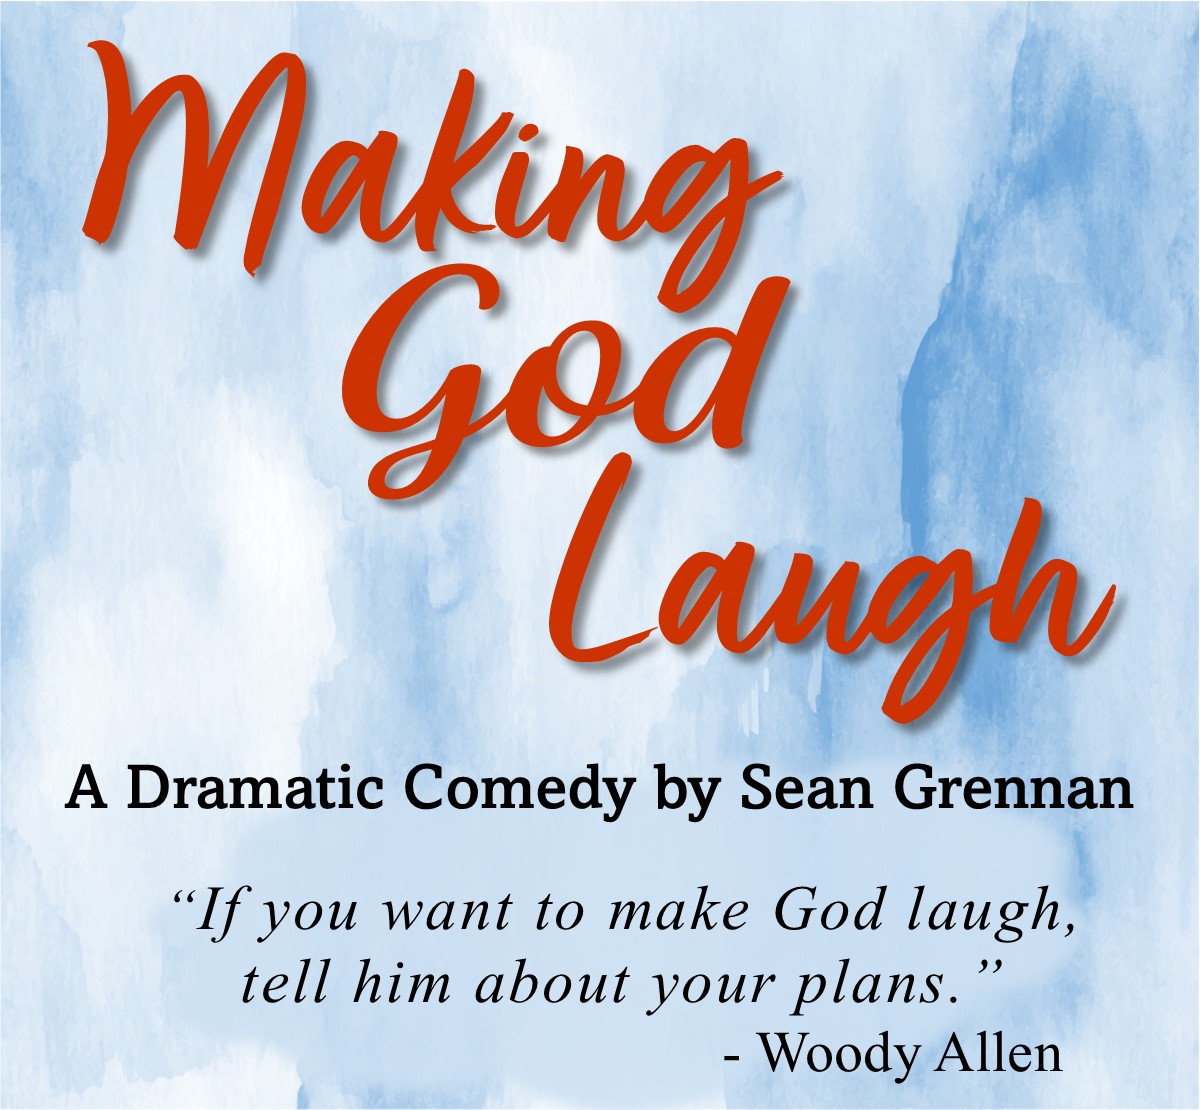 The Campus Community Players will perform “Making God Laugh” at UWSP at Marshfield April 13-16.